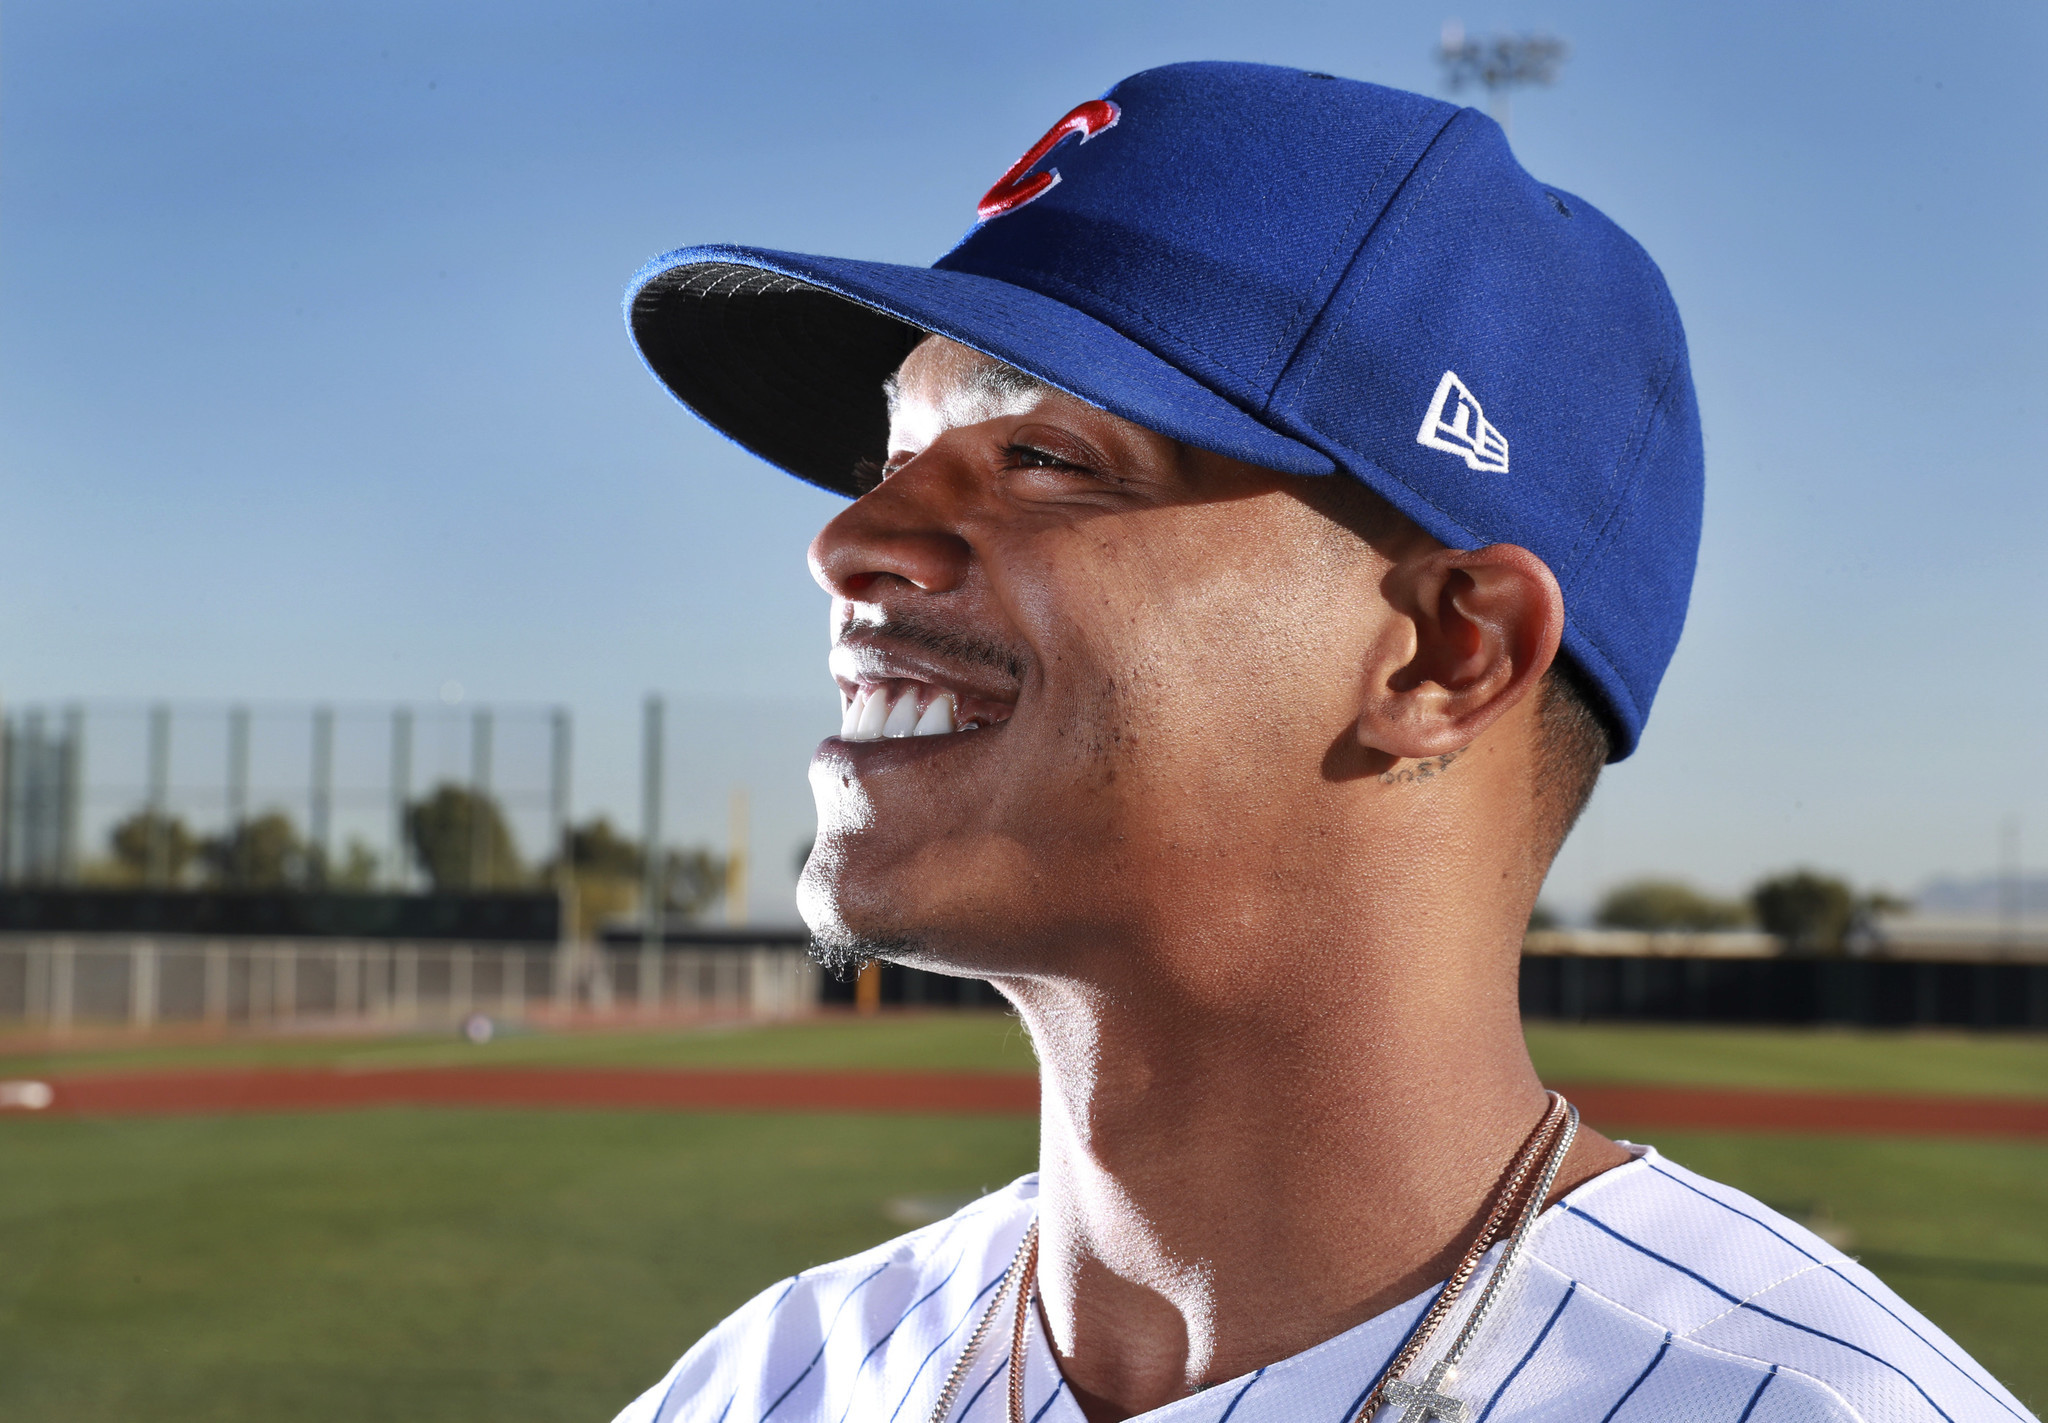 Marcus Stroman: Inside the mind of Chicago Cubs pitcher